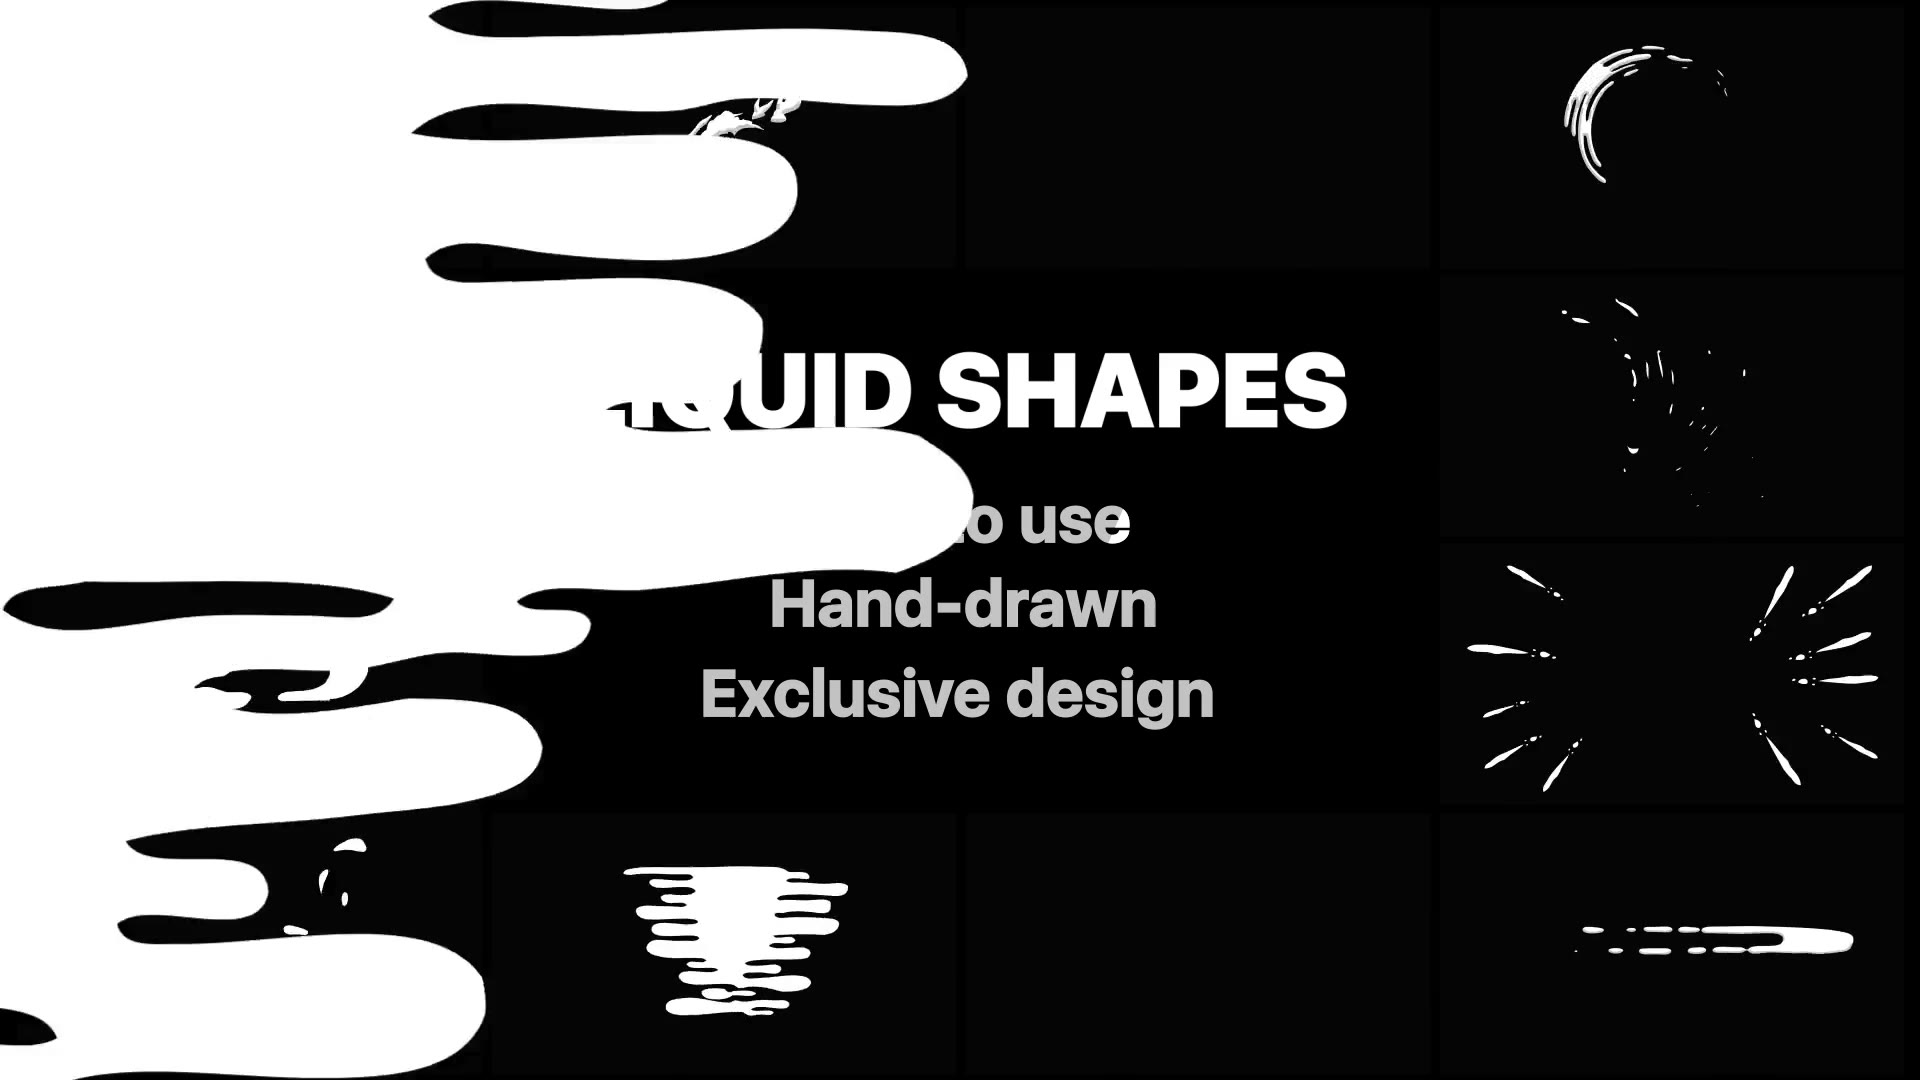 Dynamic Liquid Shapes - Download Videohive 23051817